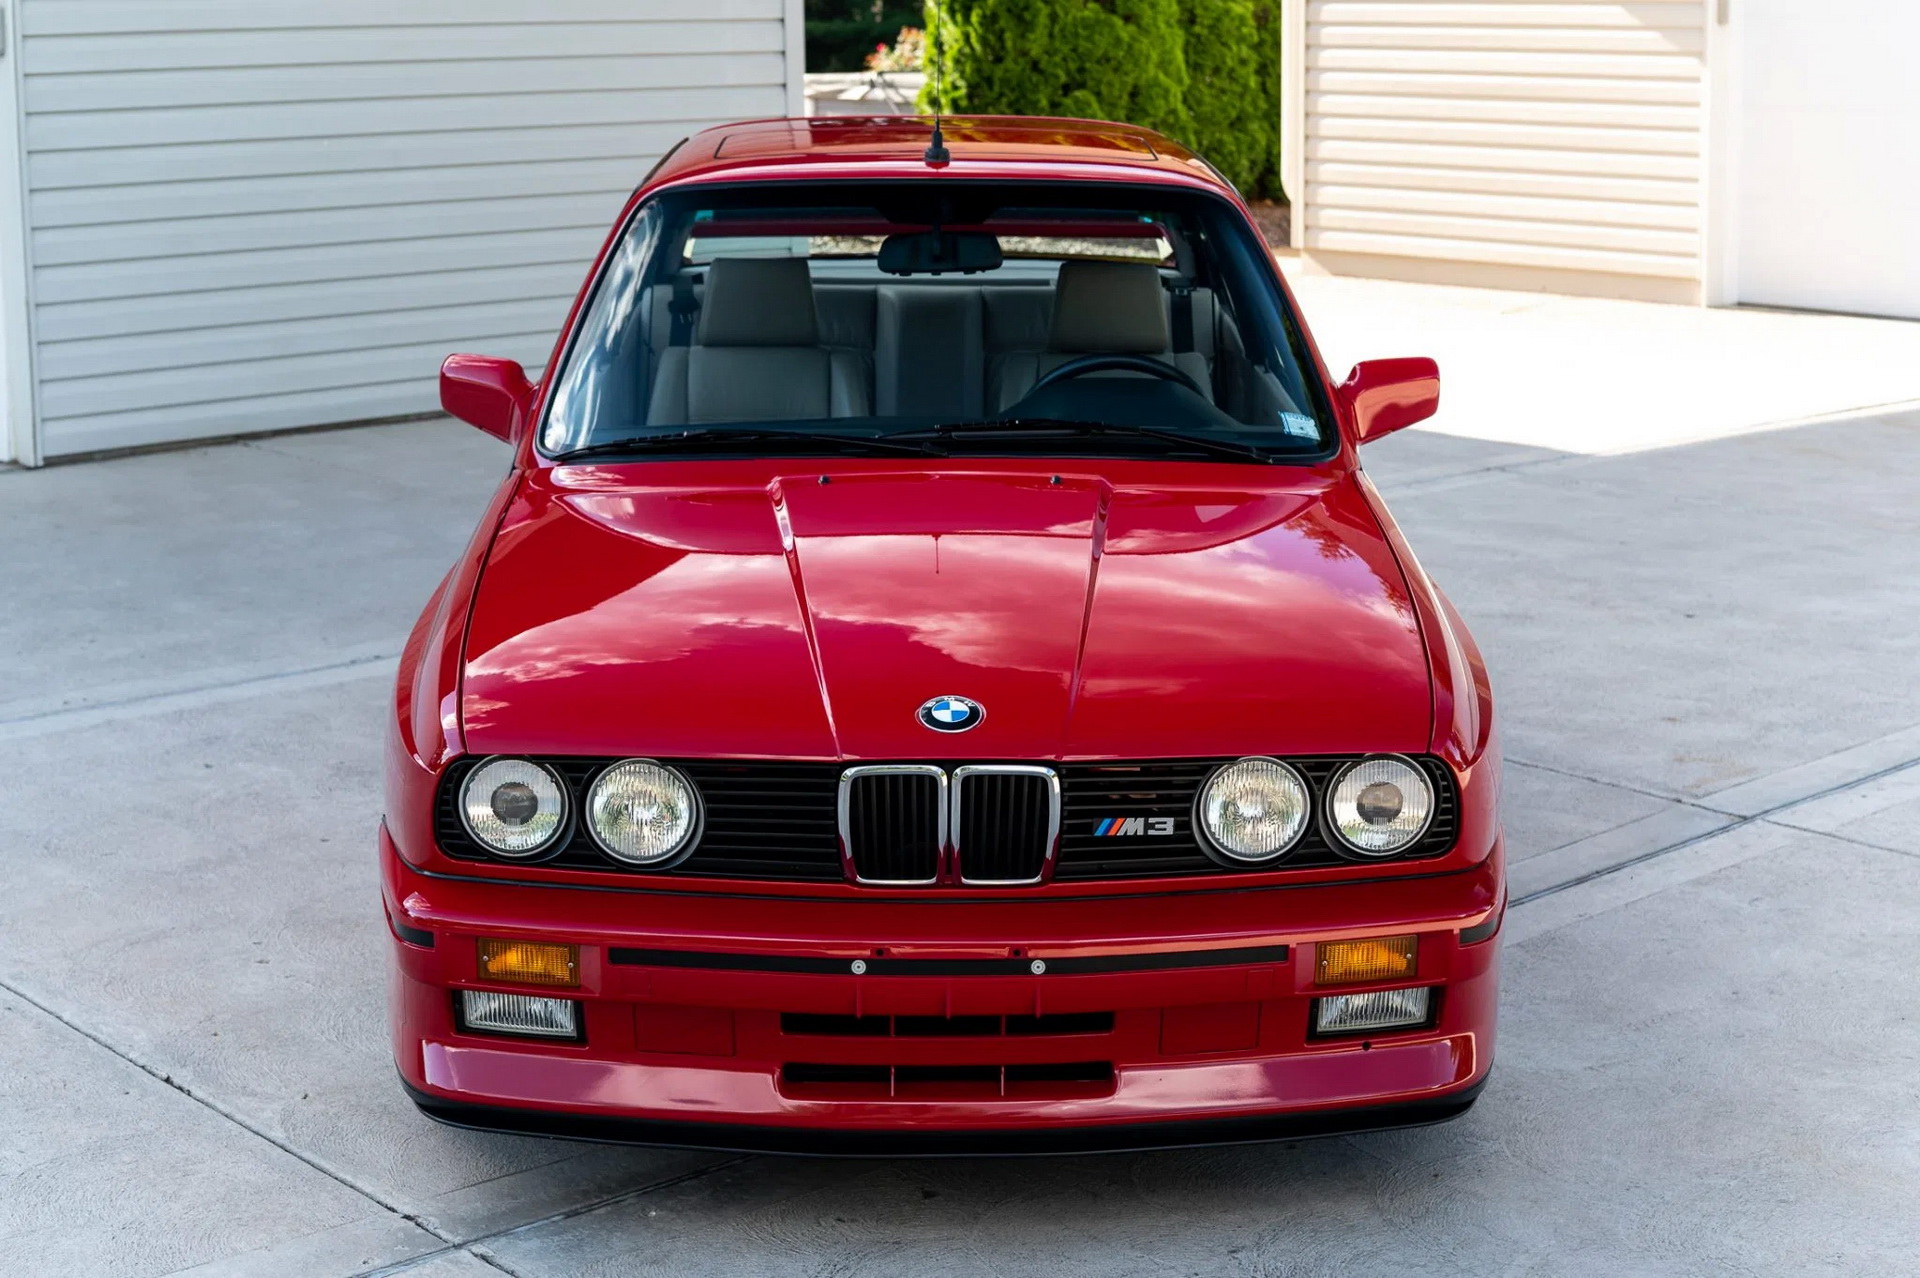 How Much Do You Think This 8k Mile E30 1988 BMW M3 Will Sell For? | Carscoops